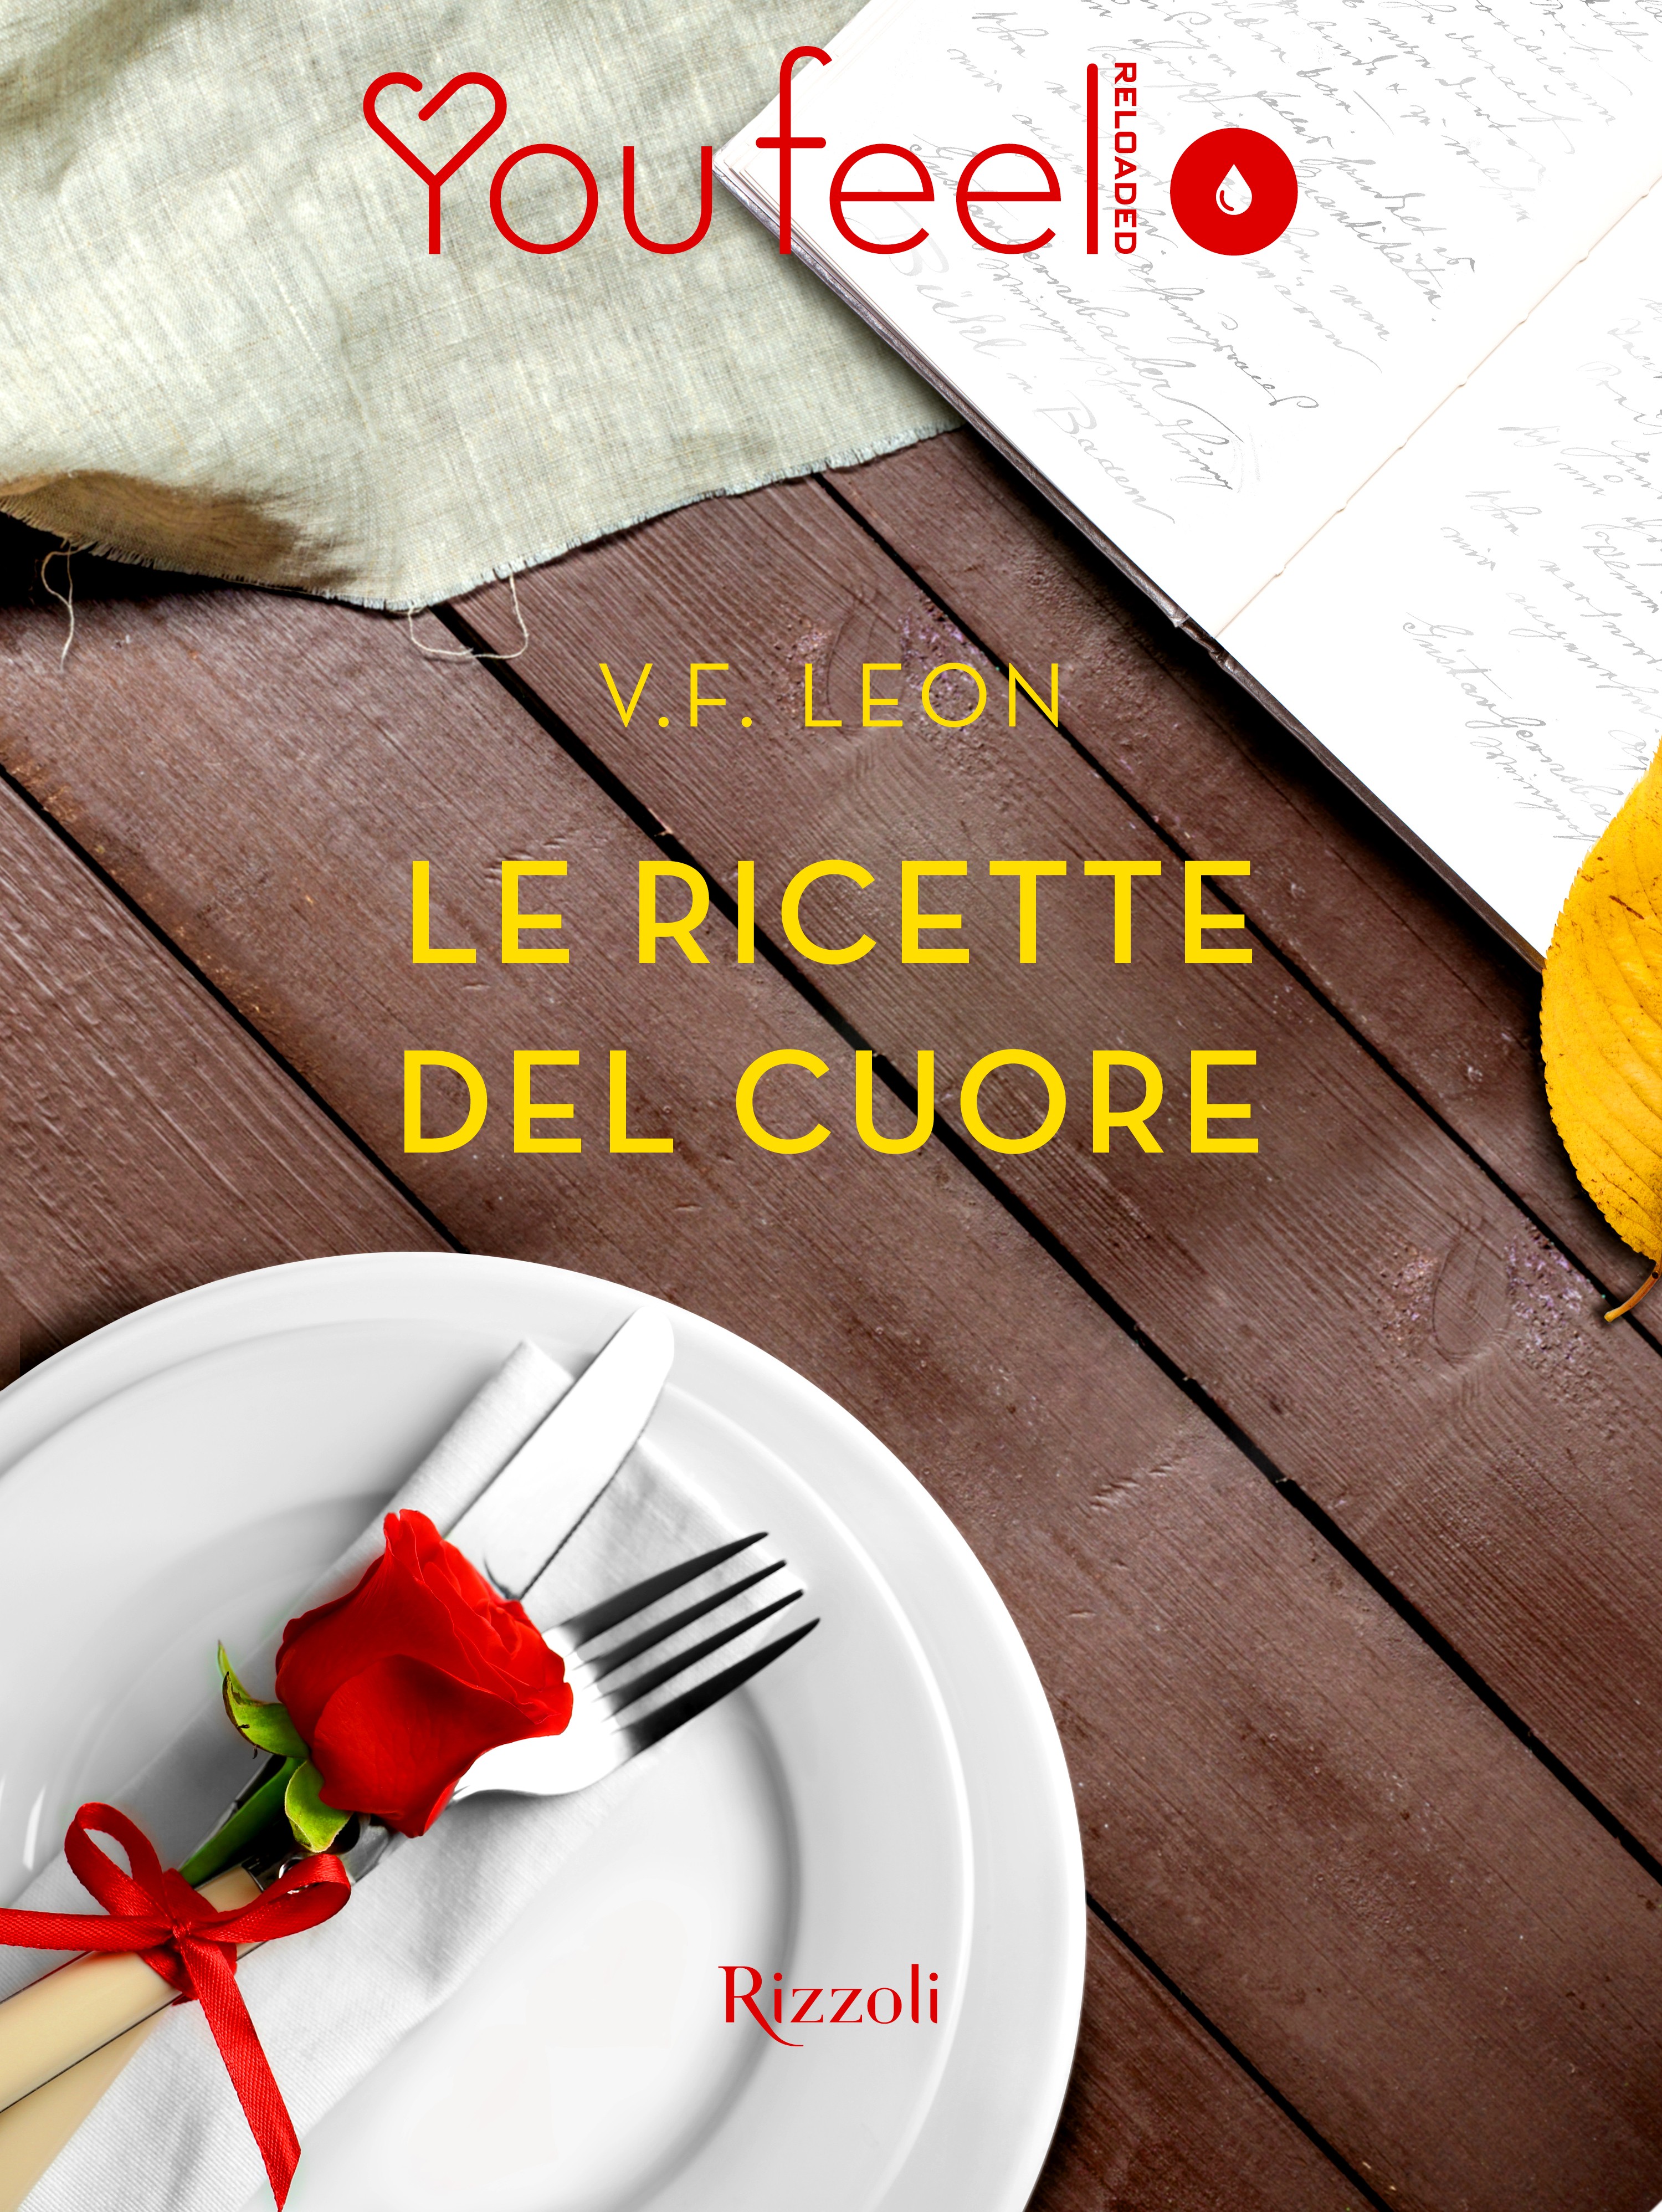 Le ricette del cuore (Youfeel) - Librerie.coop